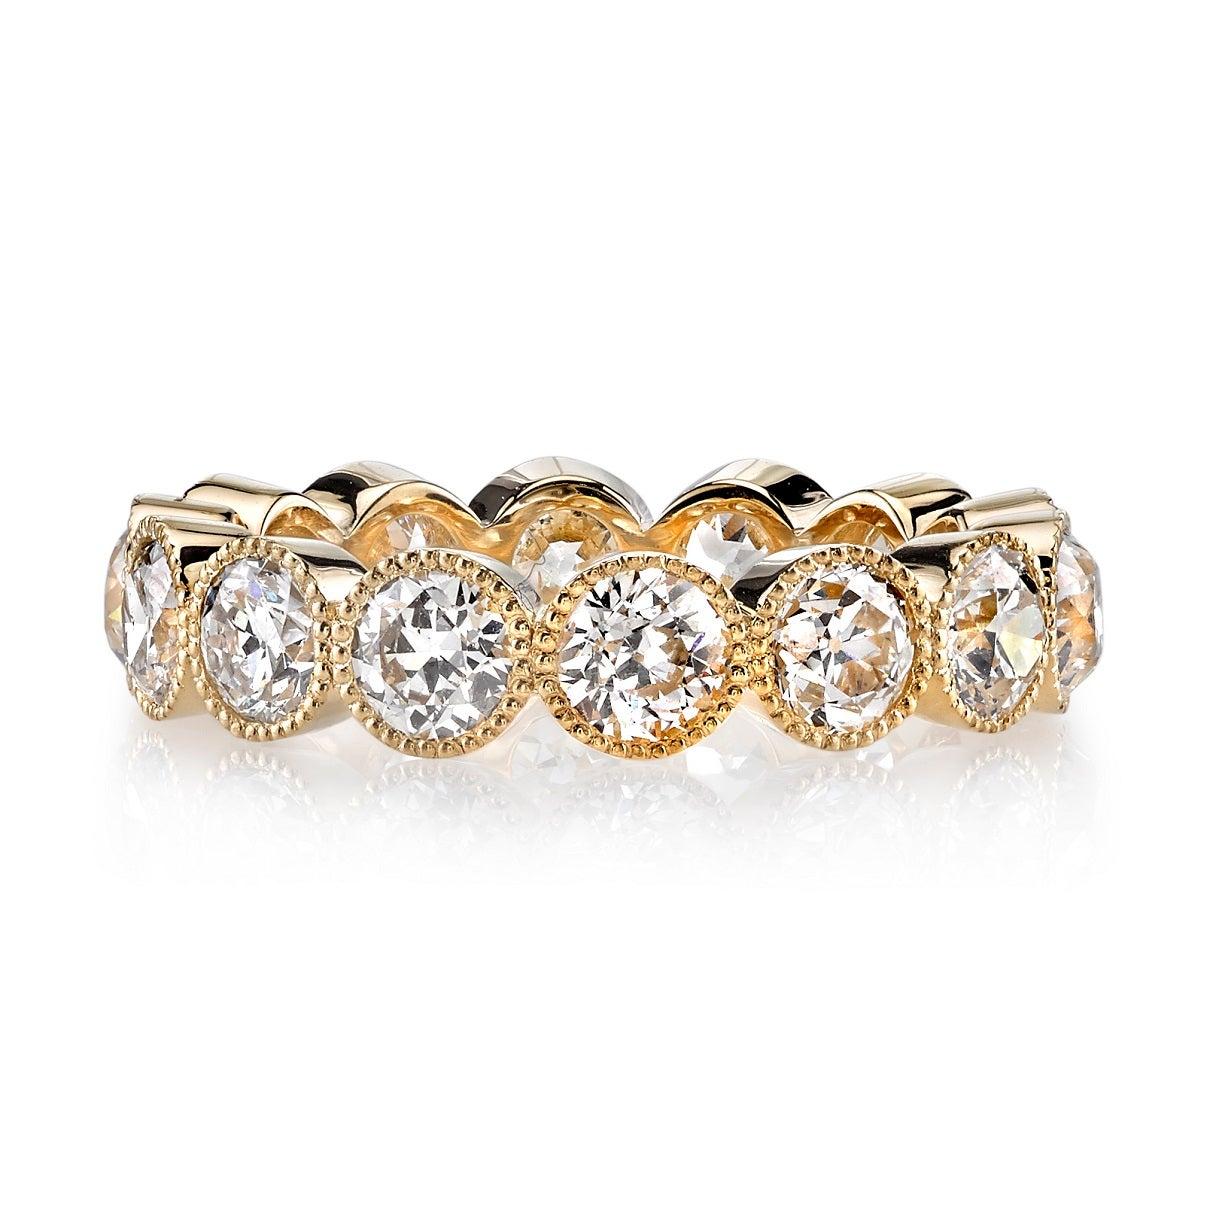 For Sale:  Handcrafted Gabby Old European Cut Diamond Eternity Band by Single Stone 2